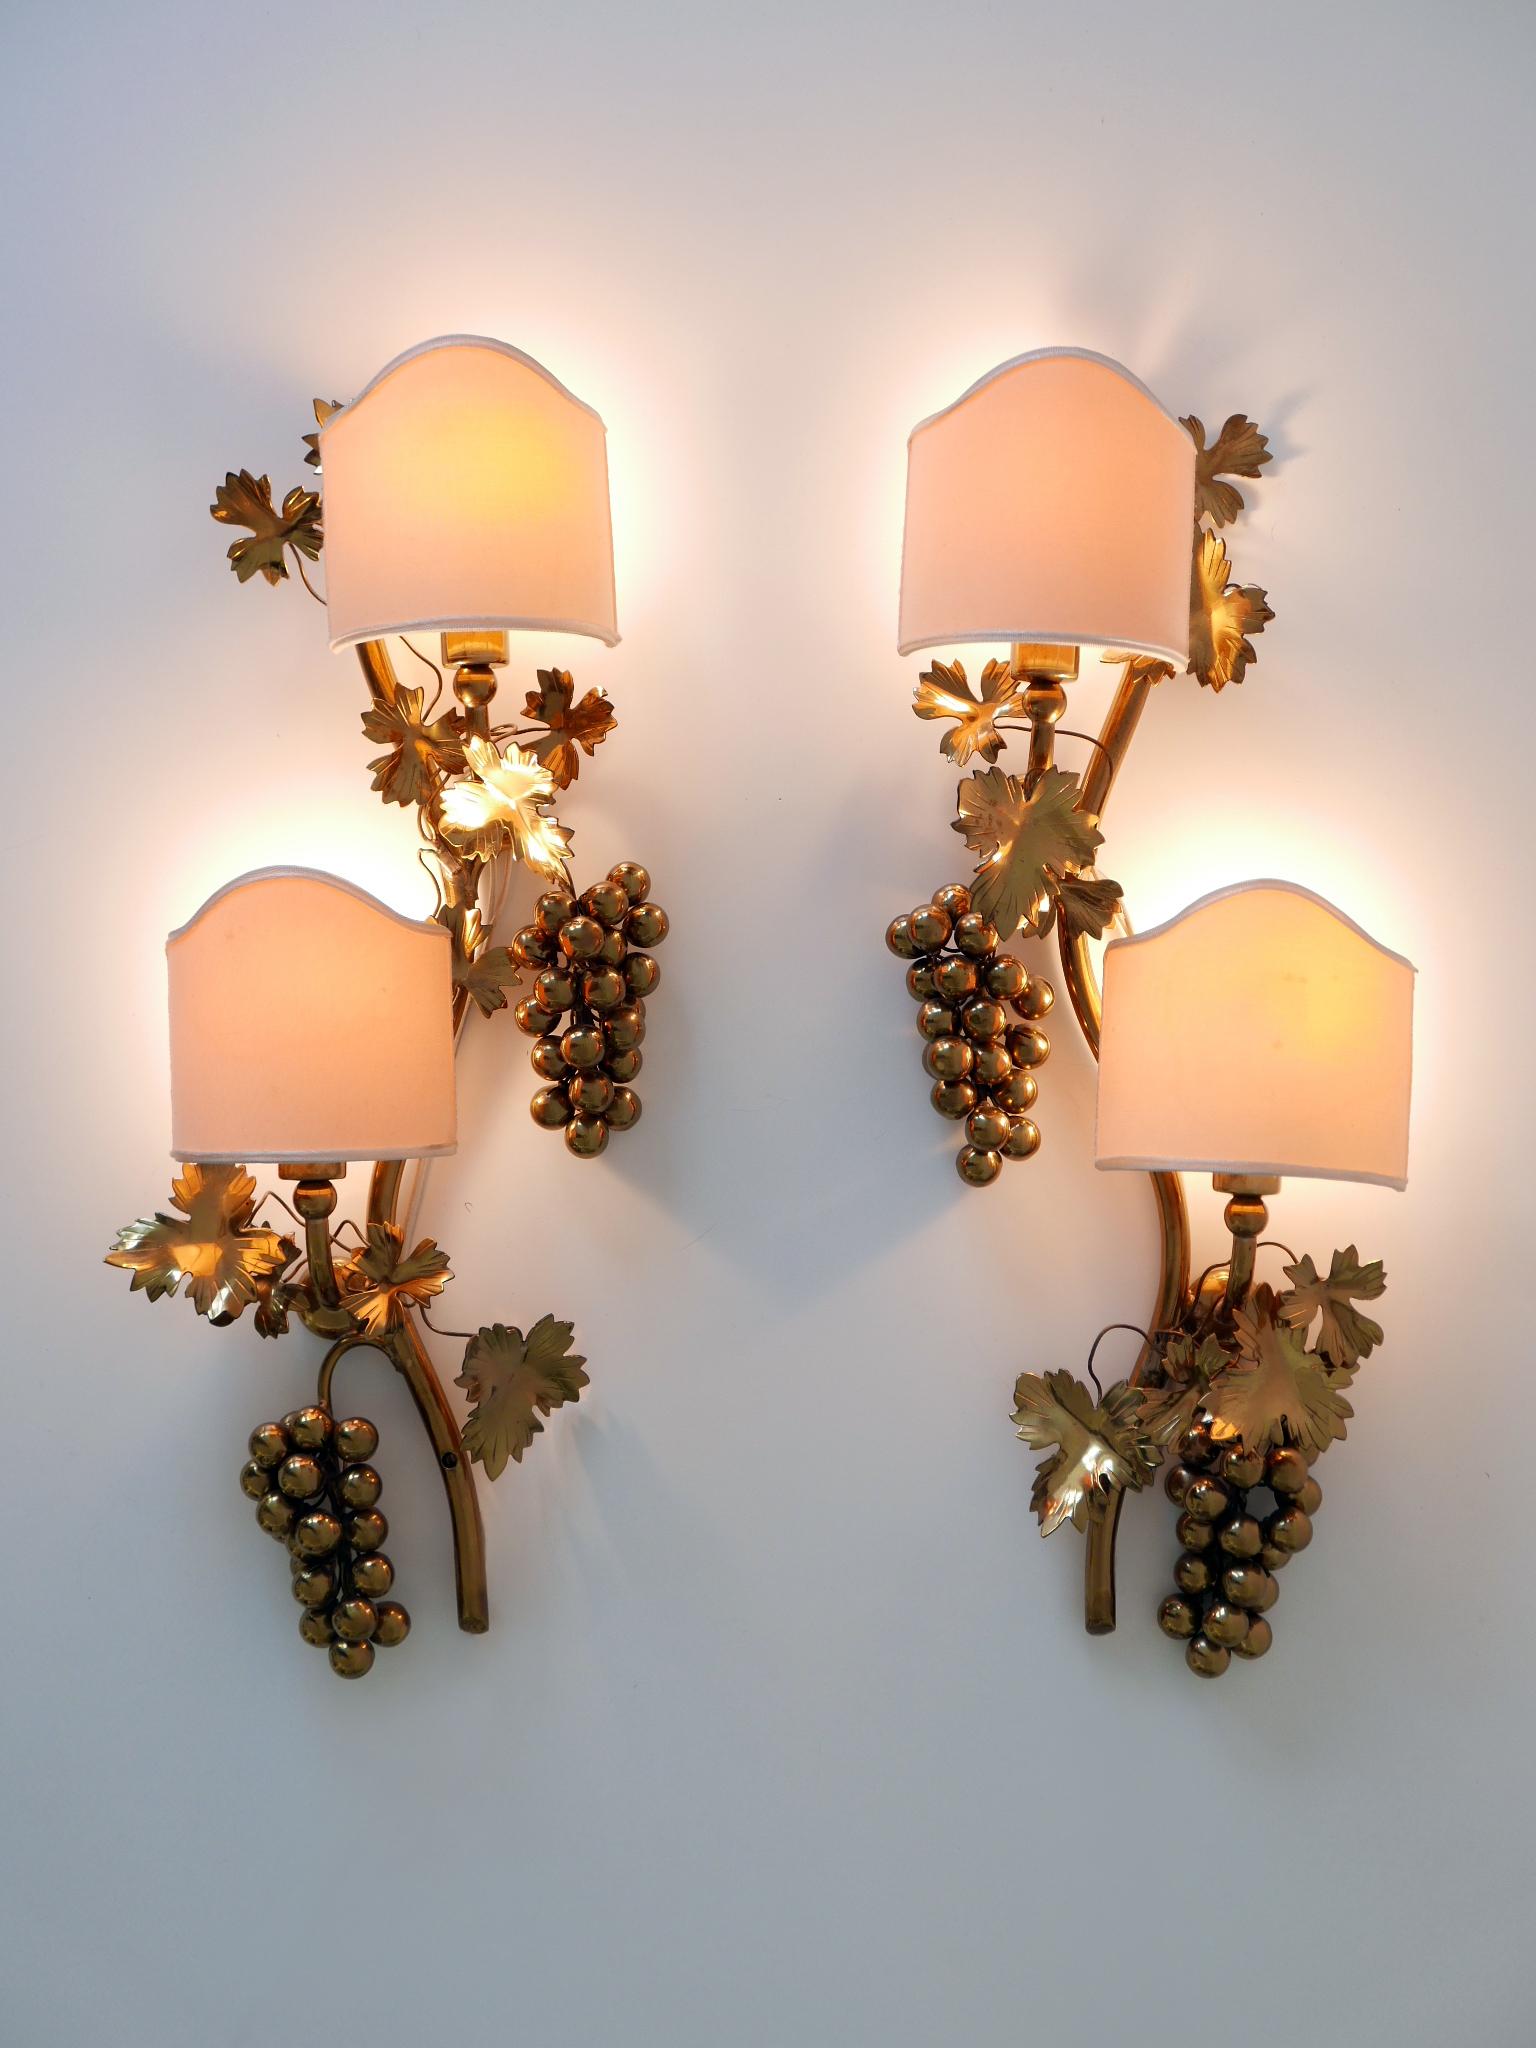 Set of two exceptional, elegant and highly decorative Mid-Century Modern brass grape vine leaves sconces or wall fixtures. Designed & manufactured in Germany, 1970s.

Executed in brass and fabric, each fixture is executed with 2 x E14 / E12 Edison